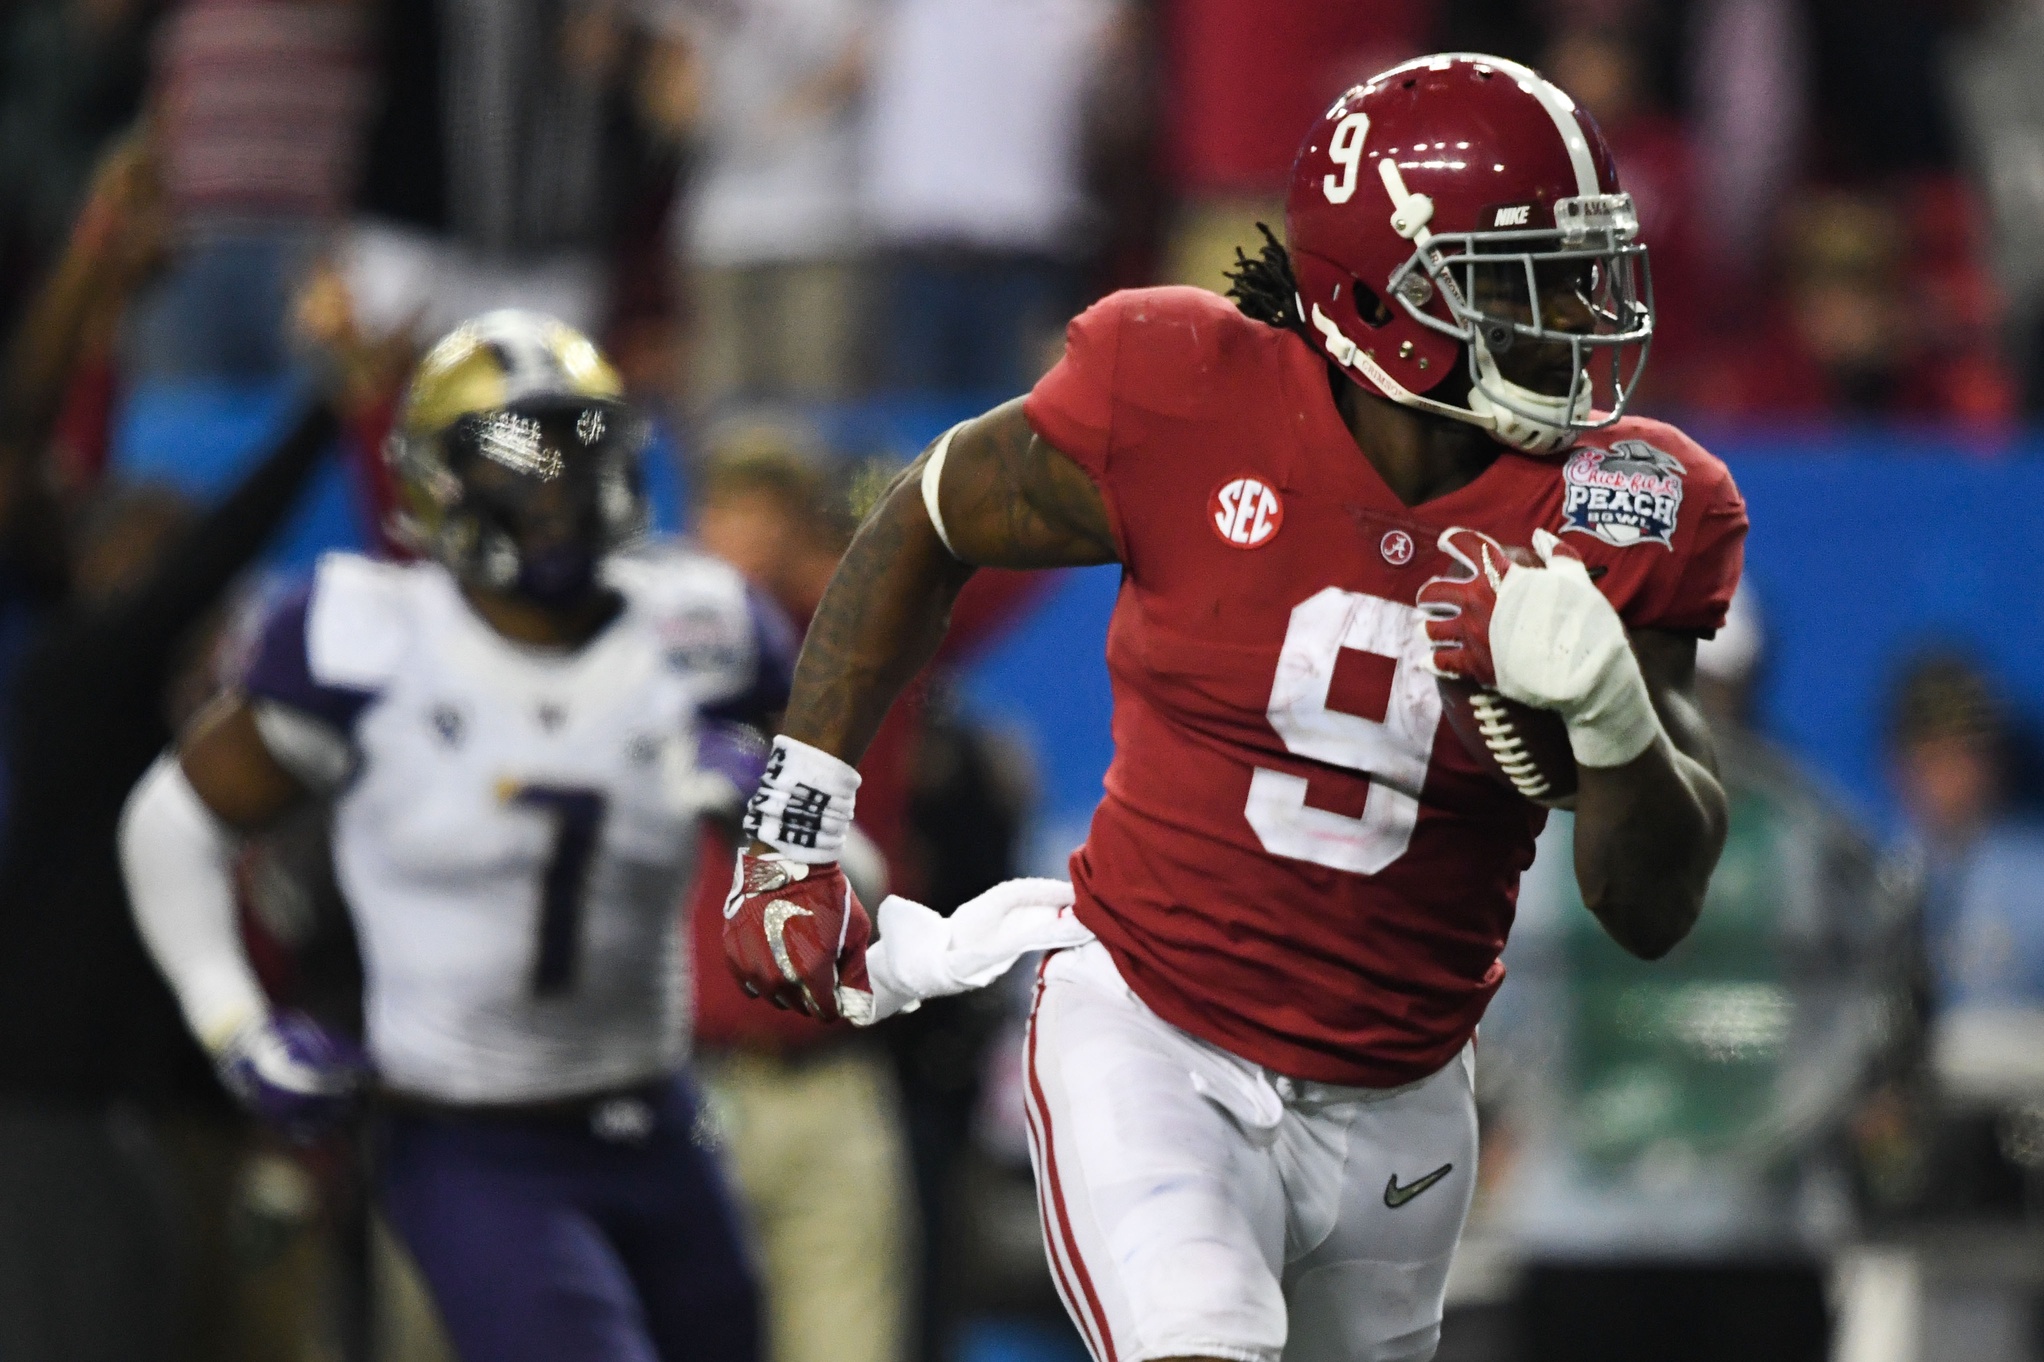 Dec 31, 2016; Atlanta, GA, USA; Alabama Crimson Tide running back Bo Scarbrough (9) scores a touchdown during the fourth quarter in the 2016 CFP Semifinal at the Georgia Dome. Mandatory Credit: RVR Photos-USA TODAY Sports